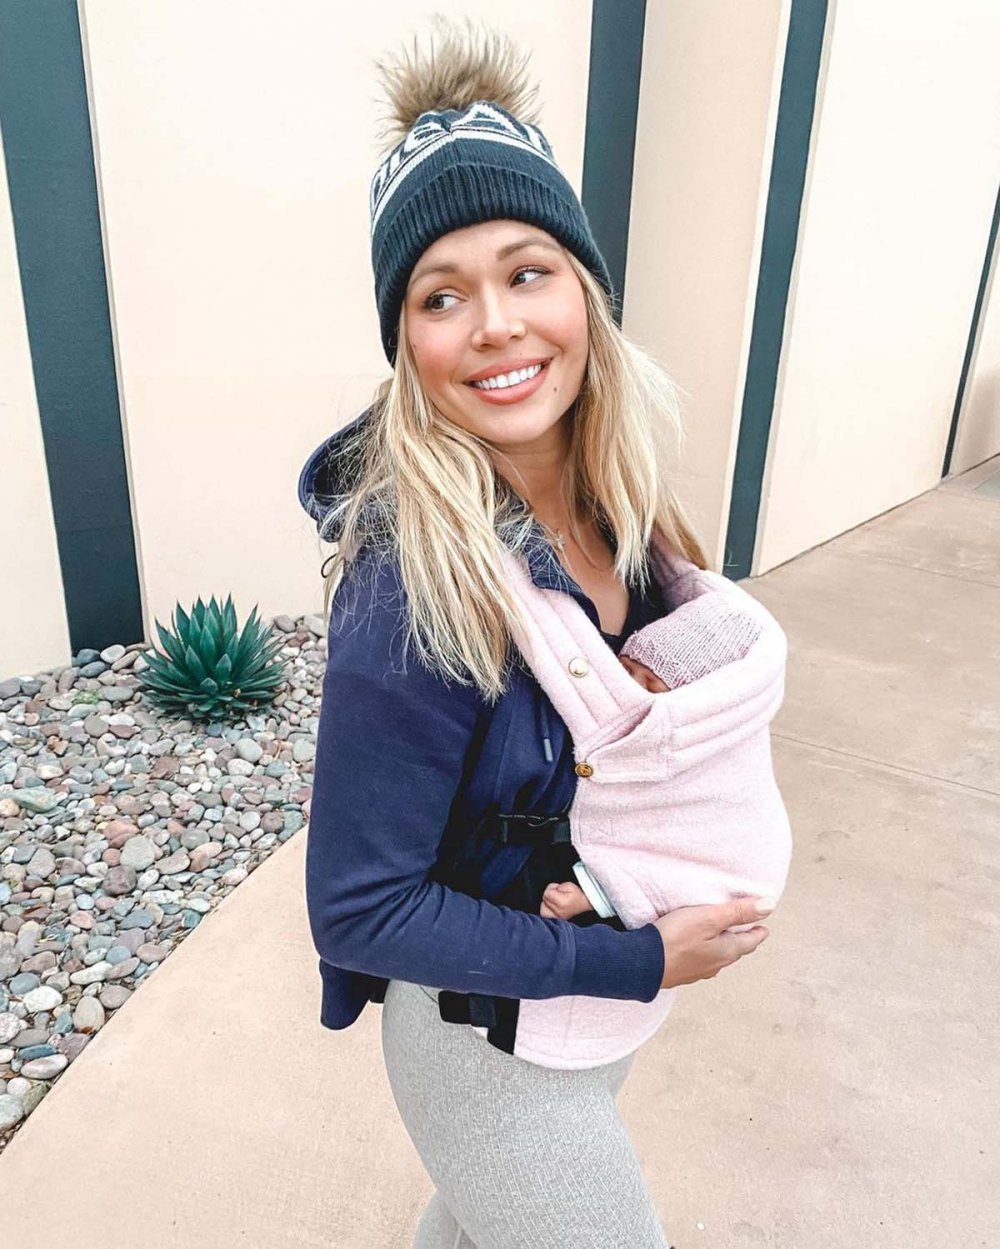 Krystal Nielson Gets Real About Hard Mom Days After Chemical Exposure